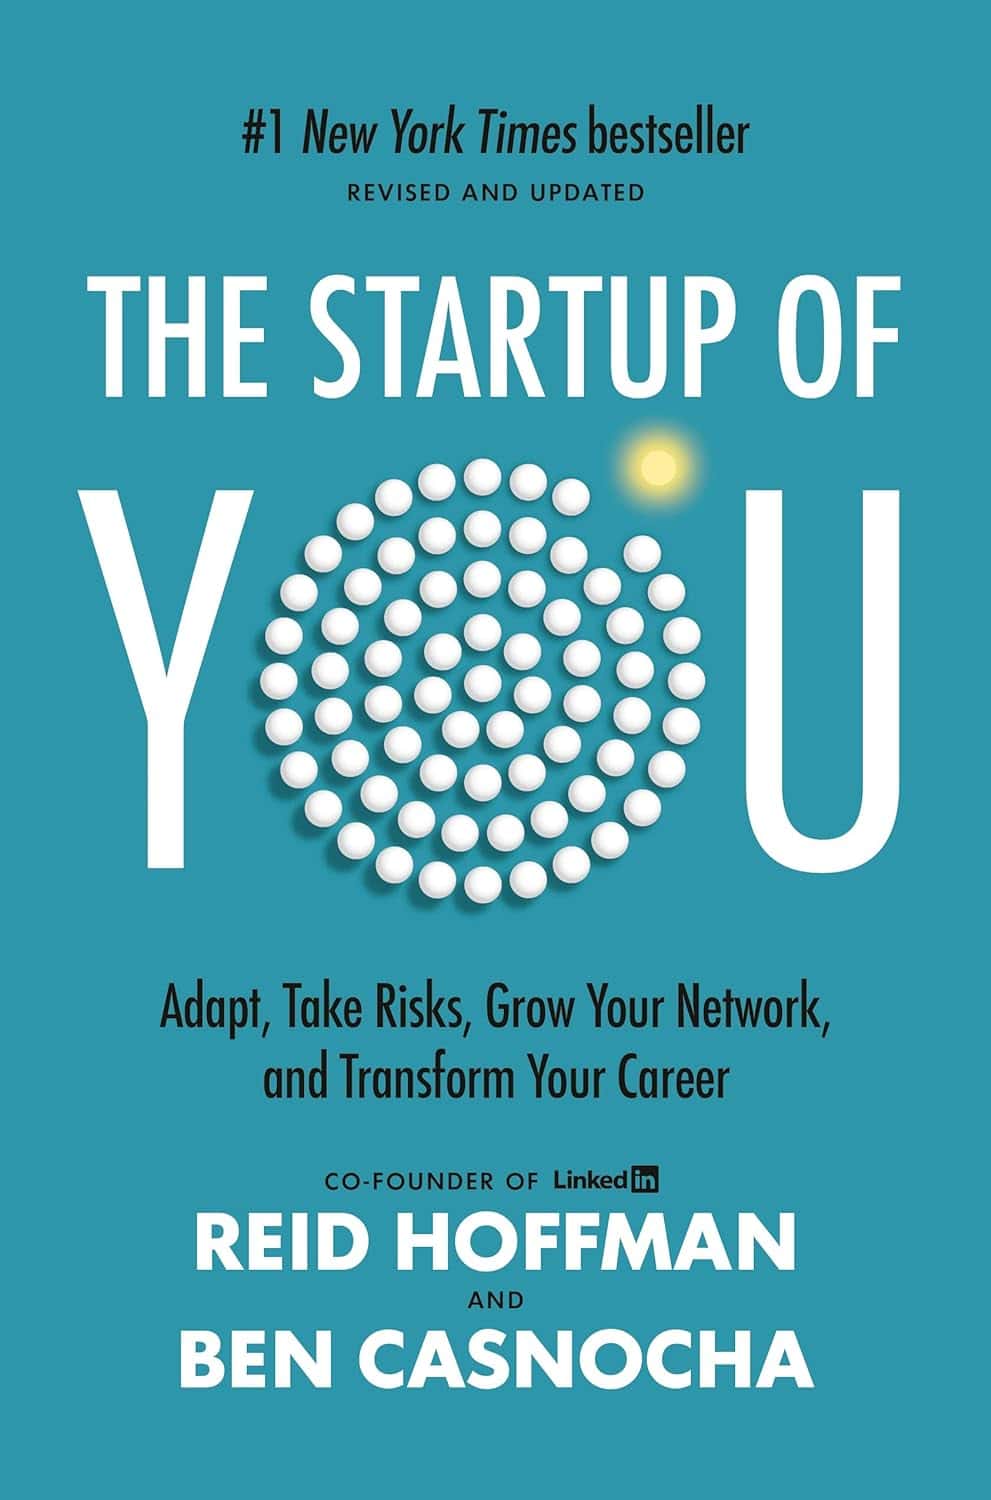 The Startup of You: Adapt to the Future, Invest in Yourself, and Transform Your Career by Reid Hoffman